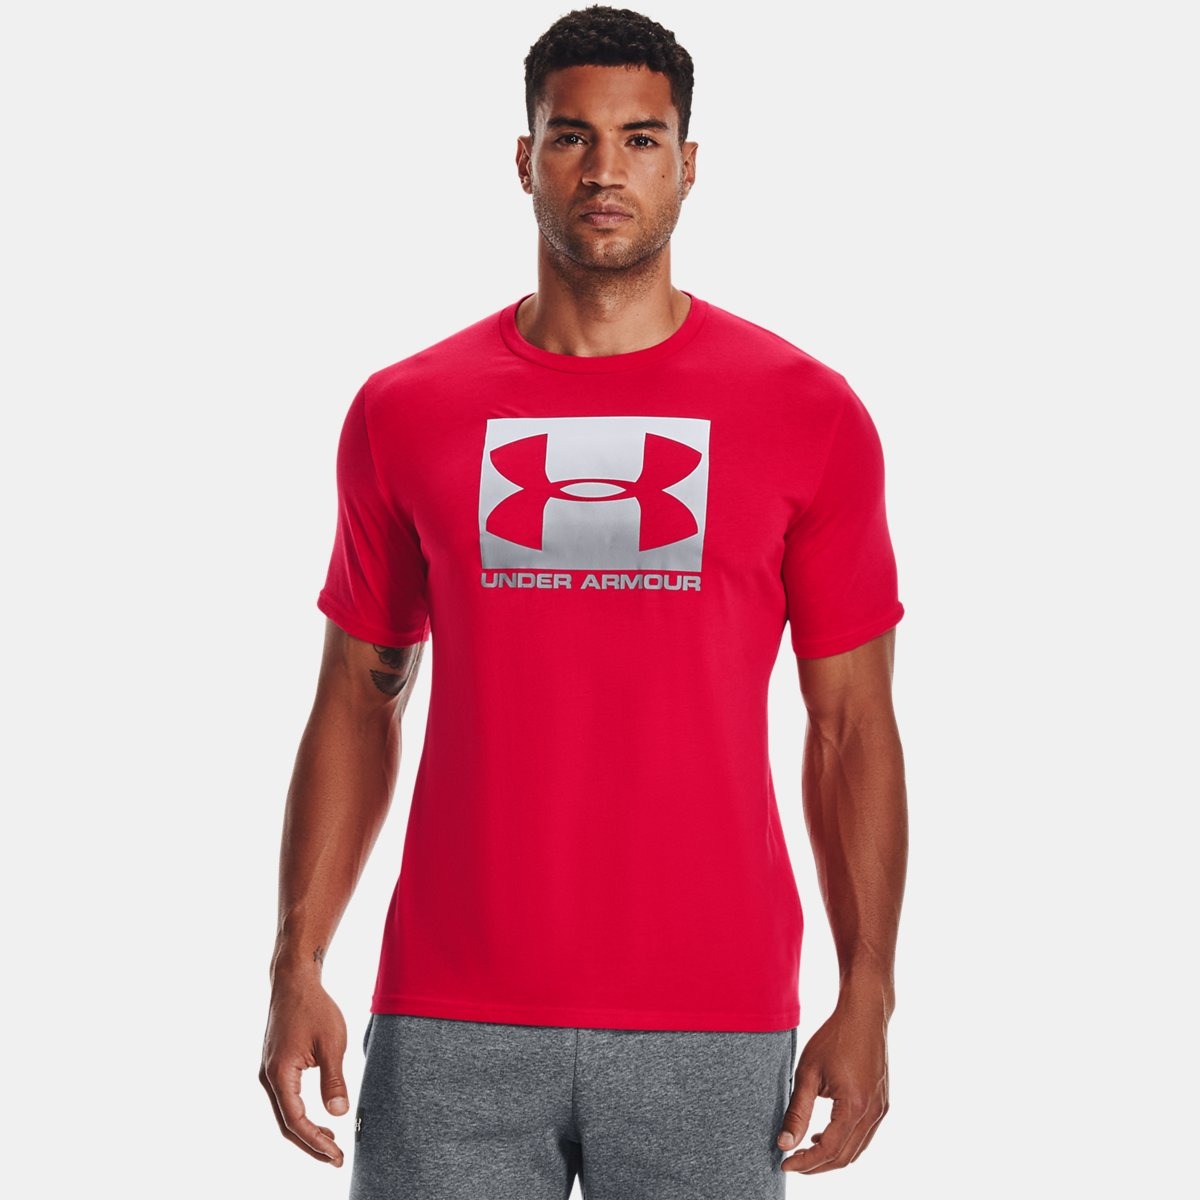 Under Armour - Red Gents T-Shirt GOOFASH